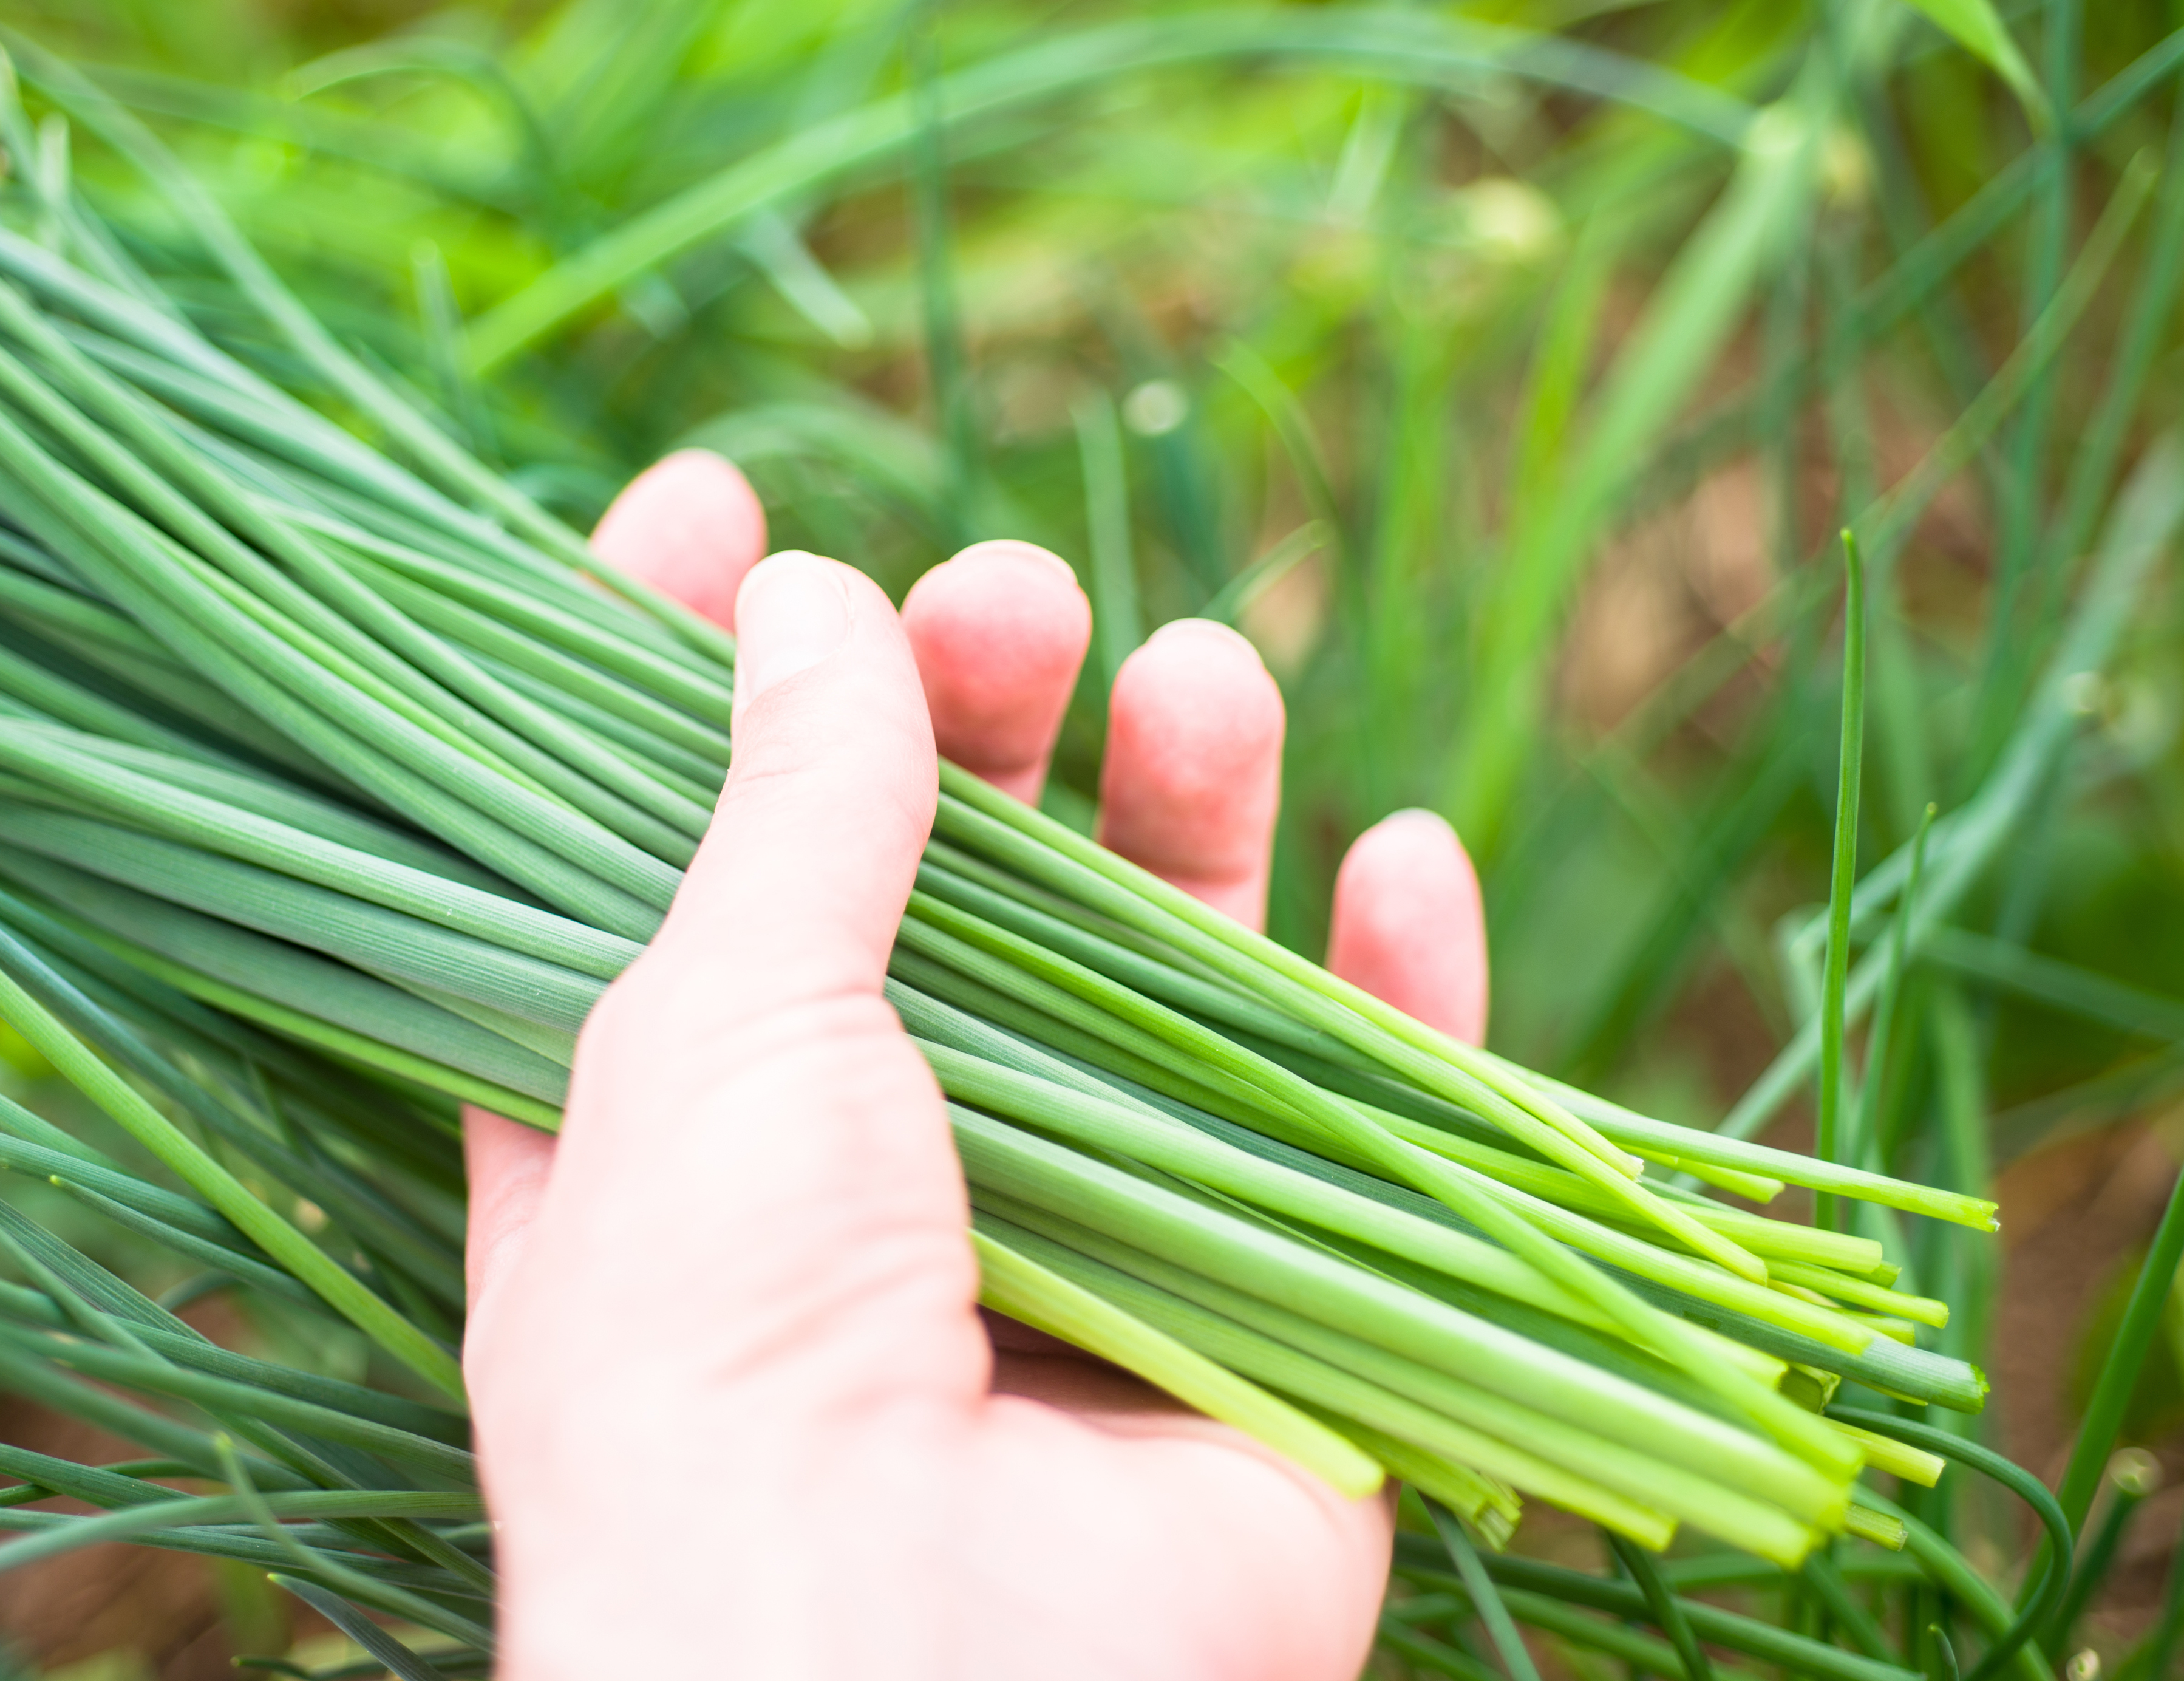 Just cut chives in someone's hand (Thinkstock/PA)